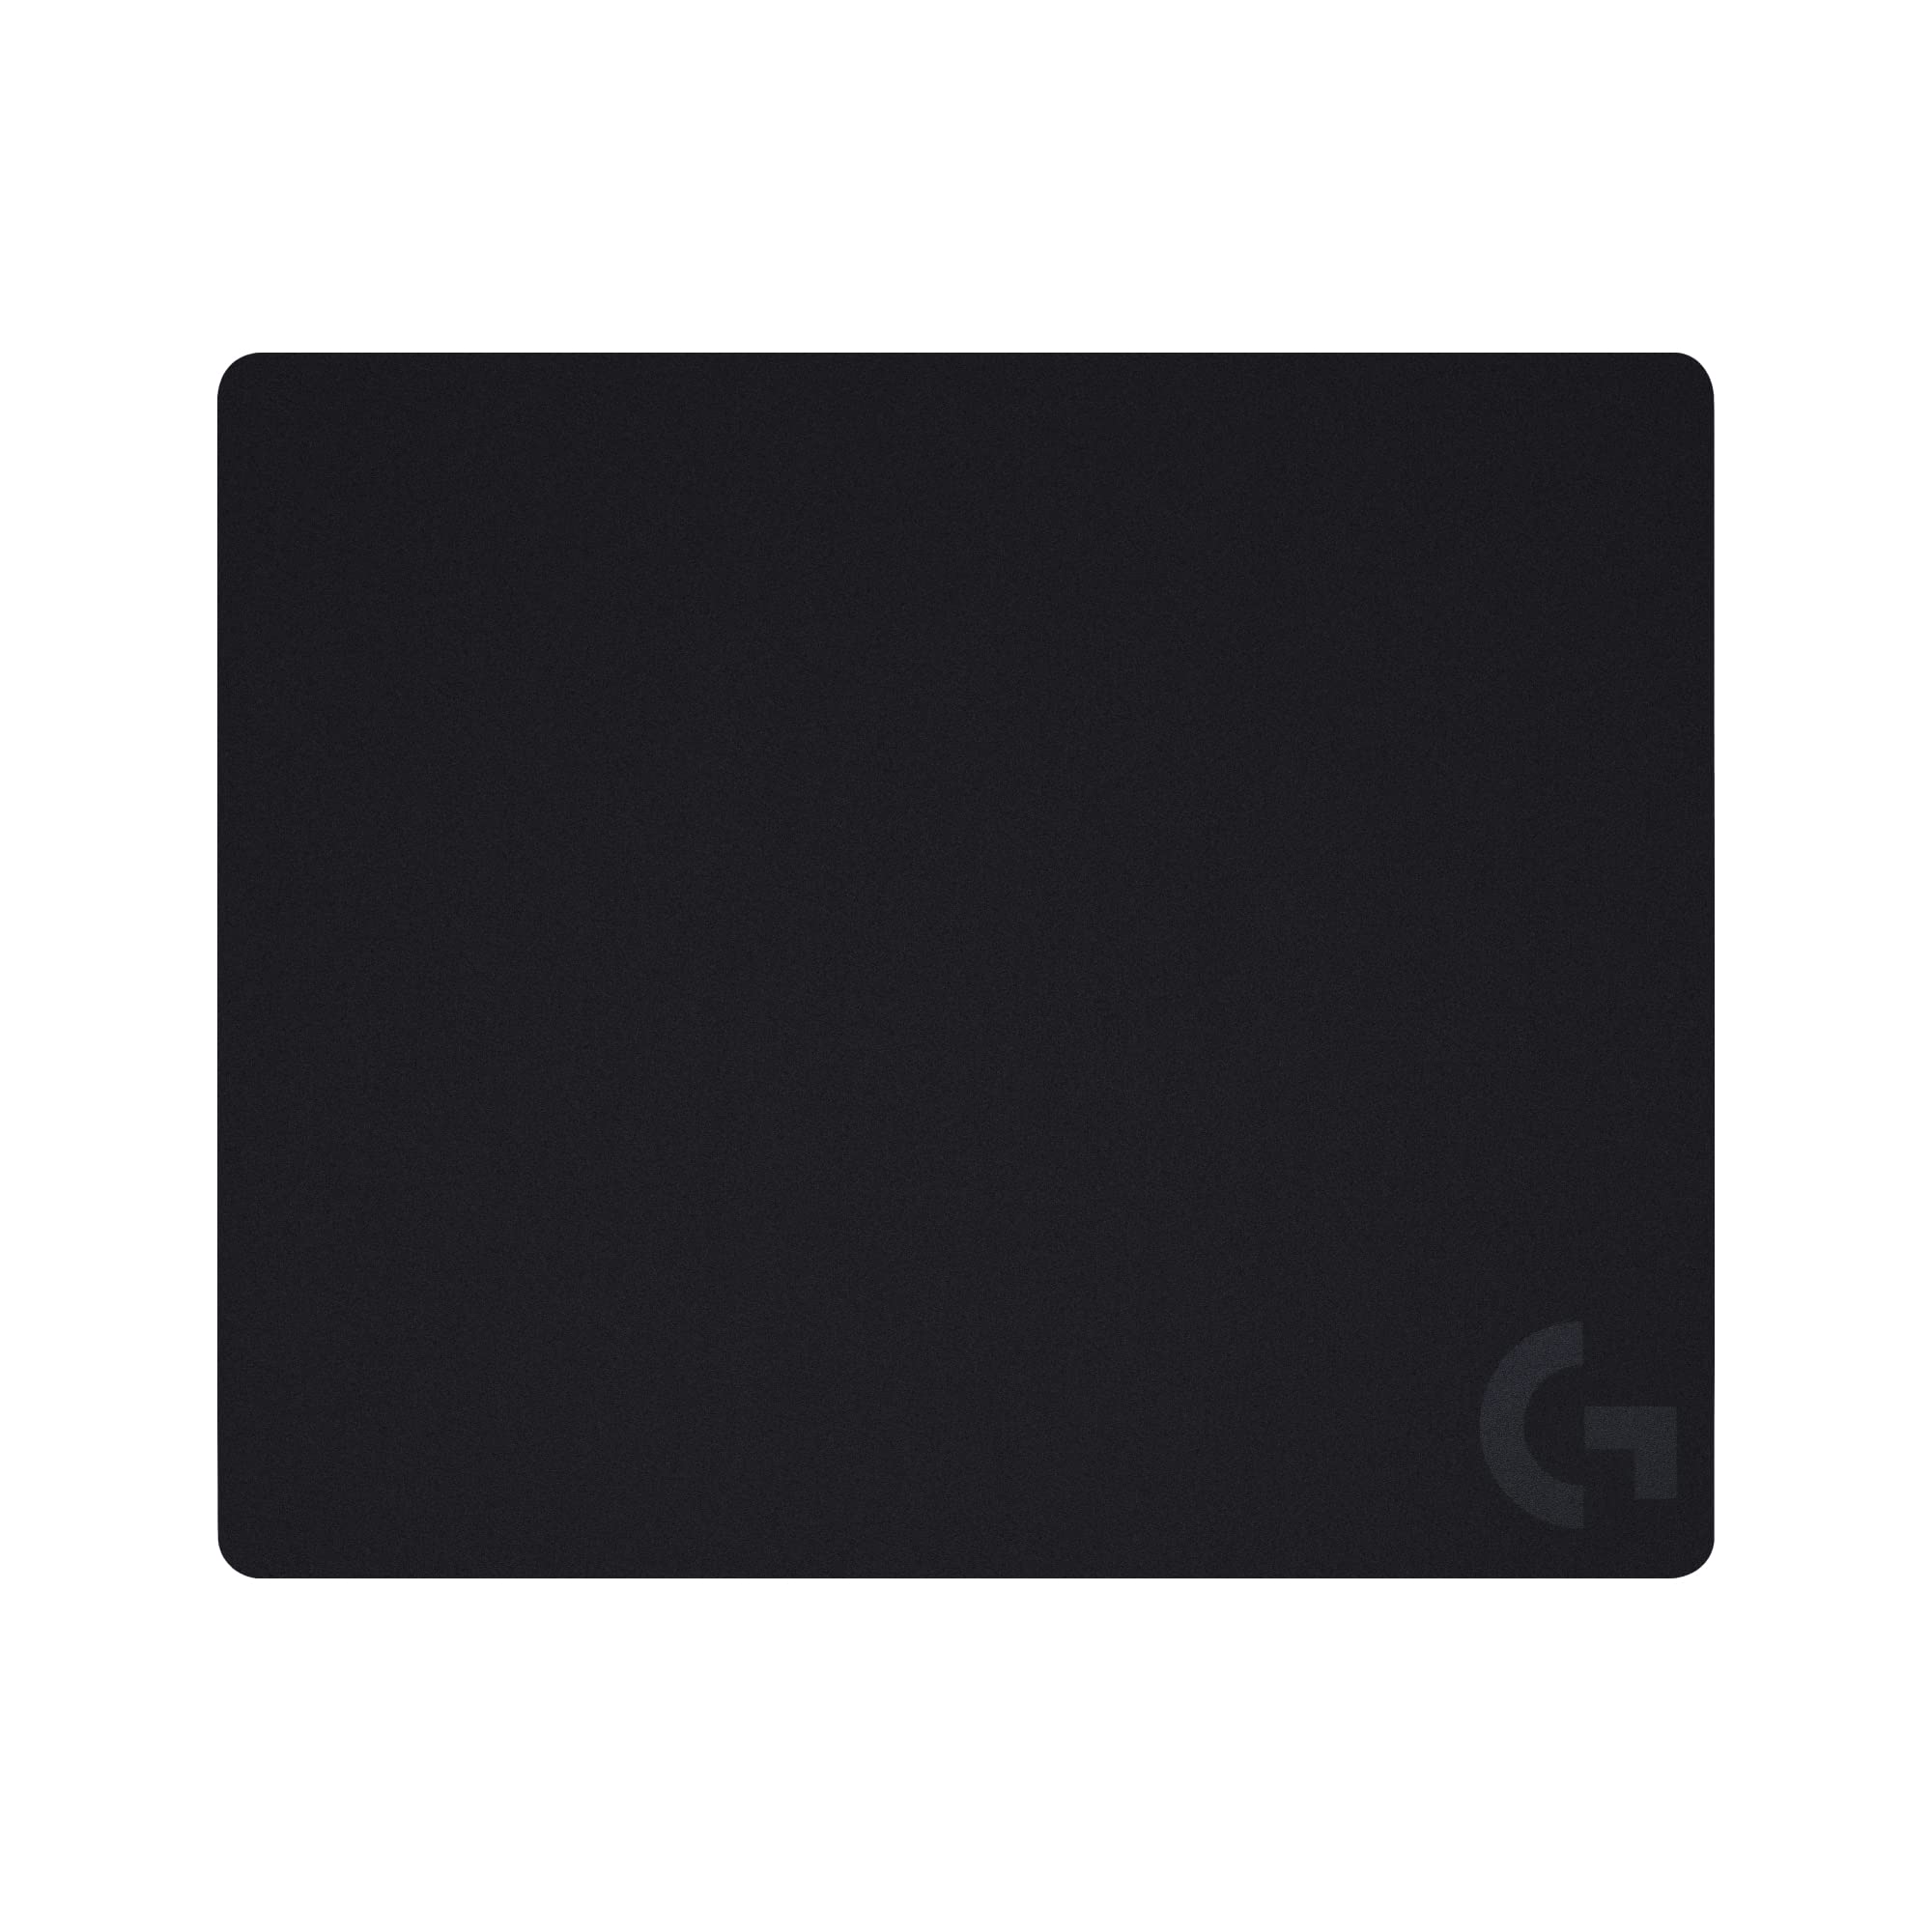 Logitech G440 Hard Gaming Mouse Pad, Optimized for Gaming Sensors, Low Surface Friction, Non-Slip Mouse Mat, Mac and PC Gaming Accessories, 340 x 280 x 5 mm